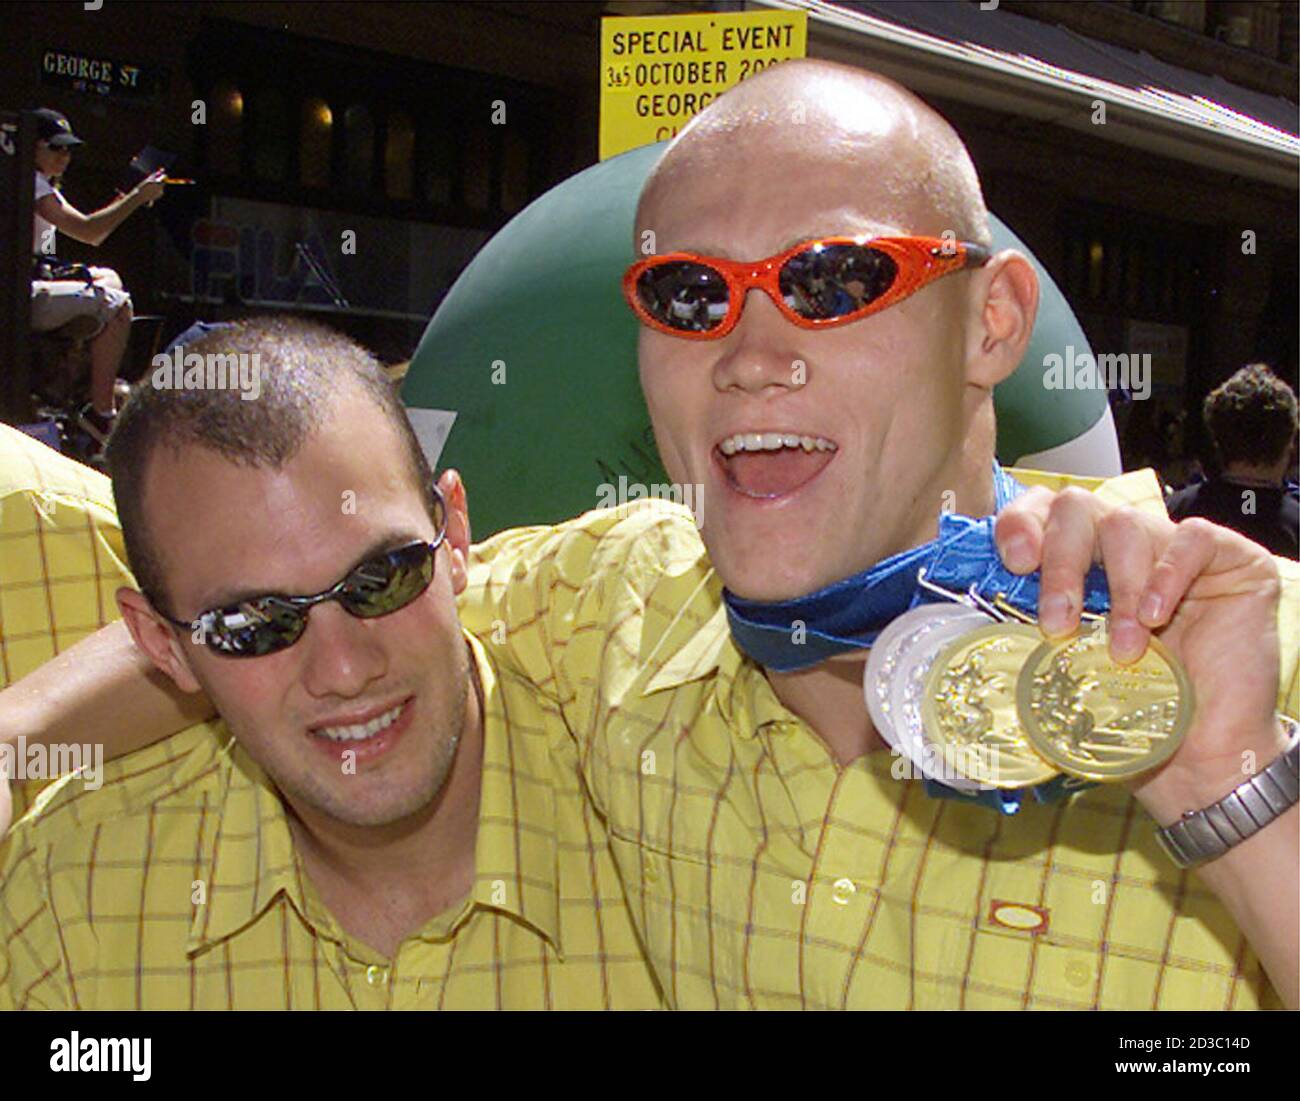 Australian Olympic Swimmer Michael Klim R Shows Off The Medals He Has Won At The Olympic Games As He Hugs Teammate Ashley Callus During A Parade Down The Main Street Of Sydney